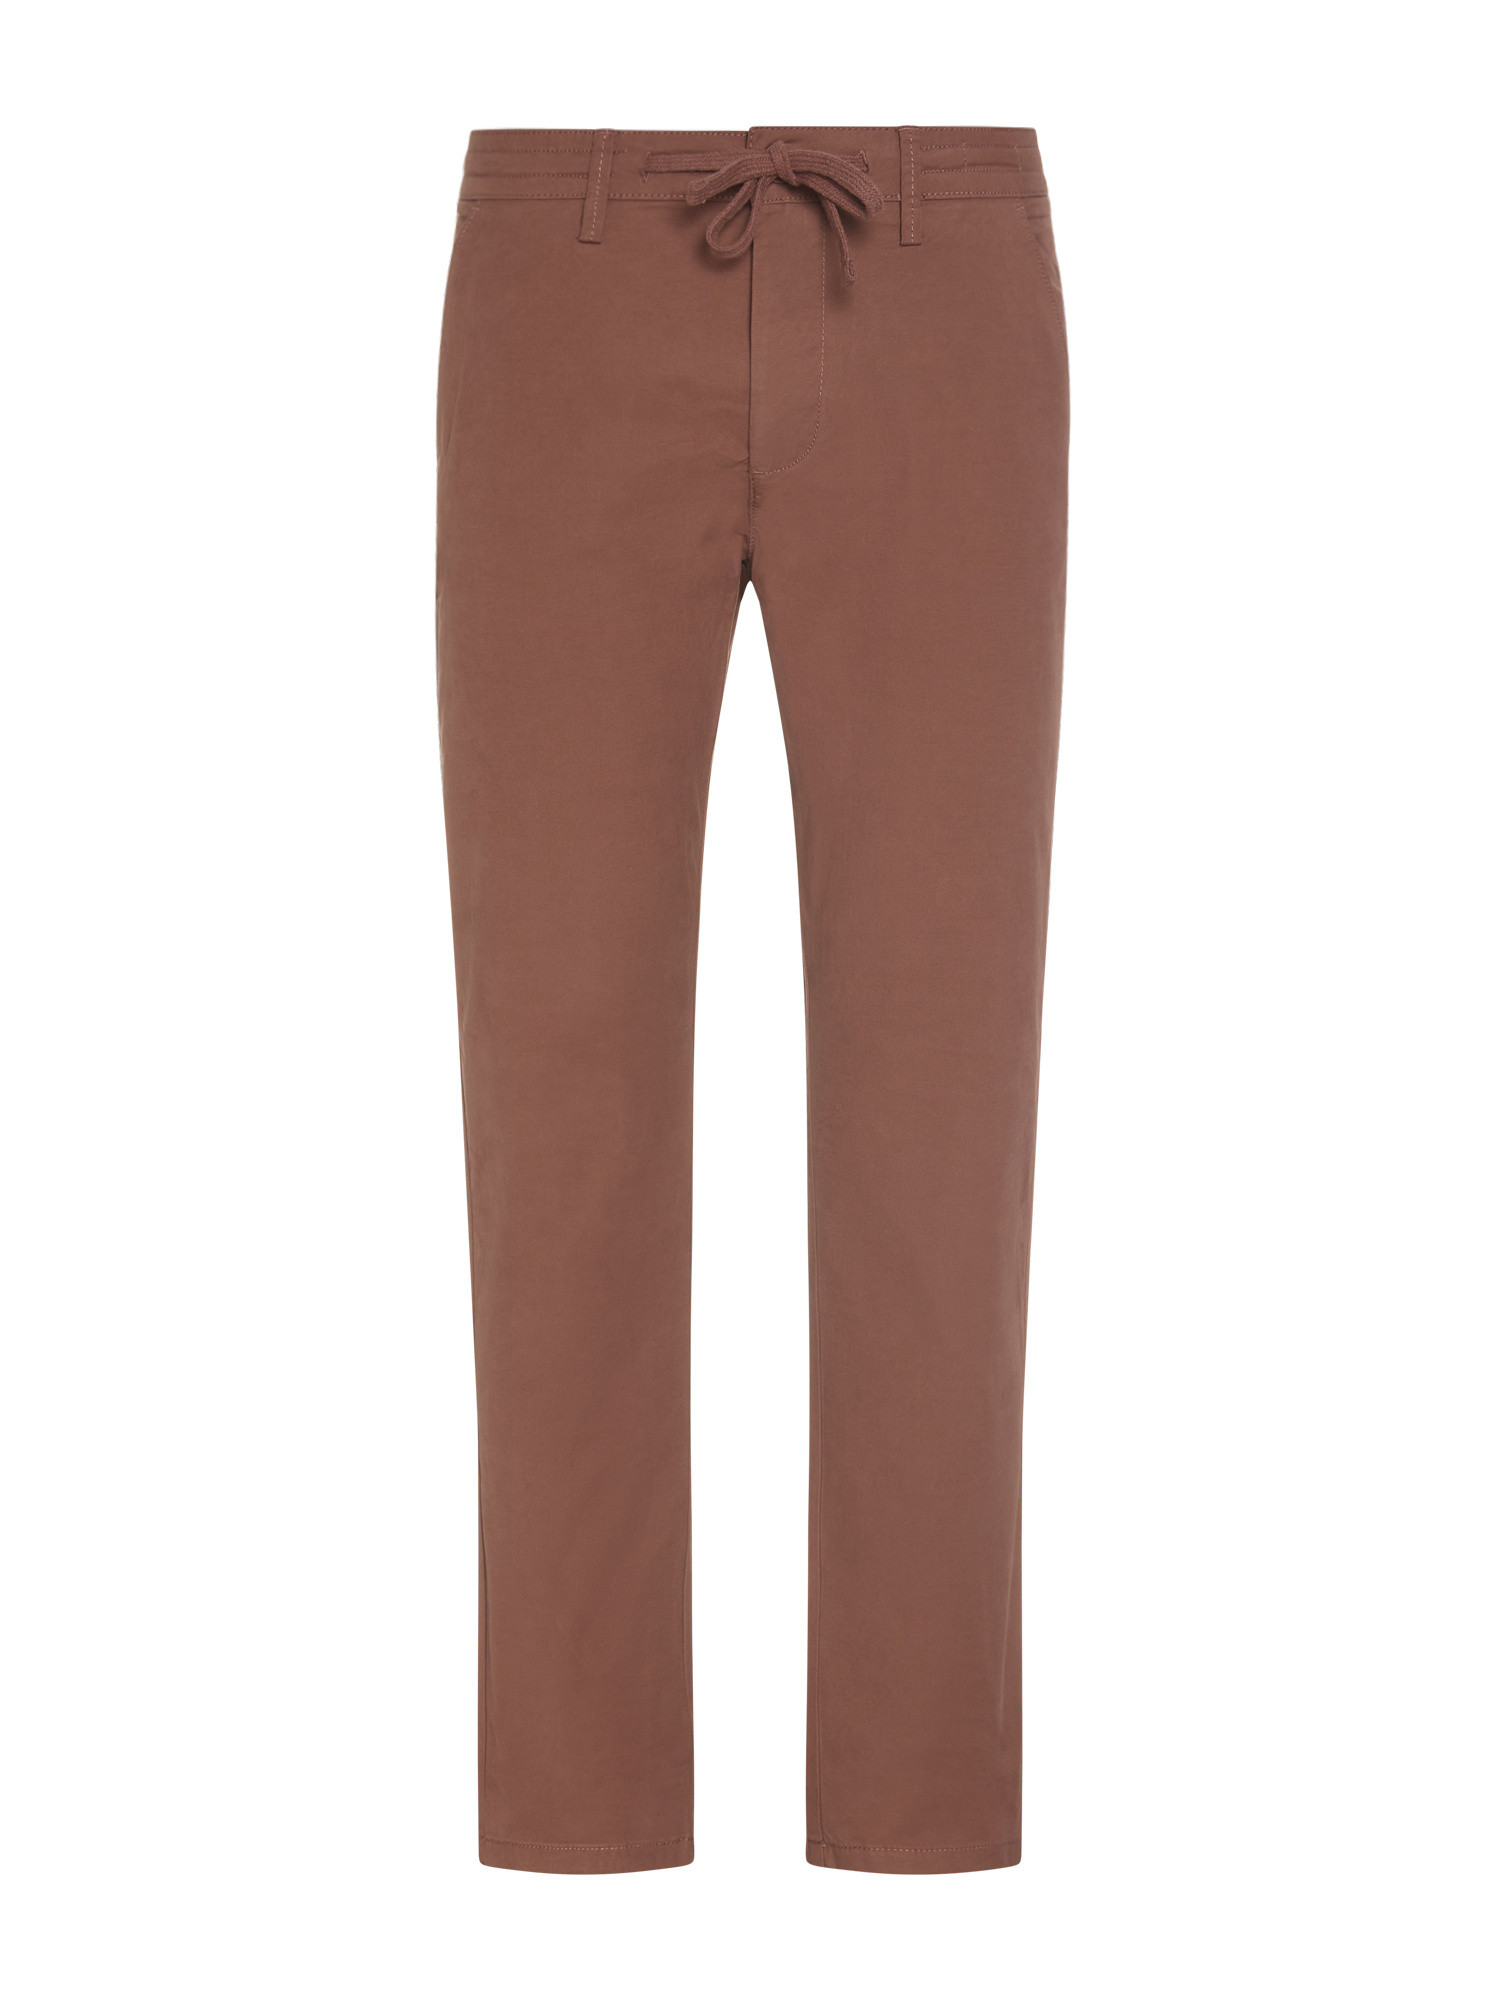 JCT - Slim fit chino jogger, Brown, large image number 0